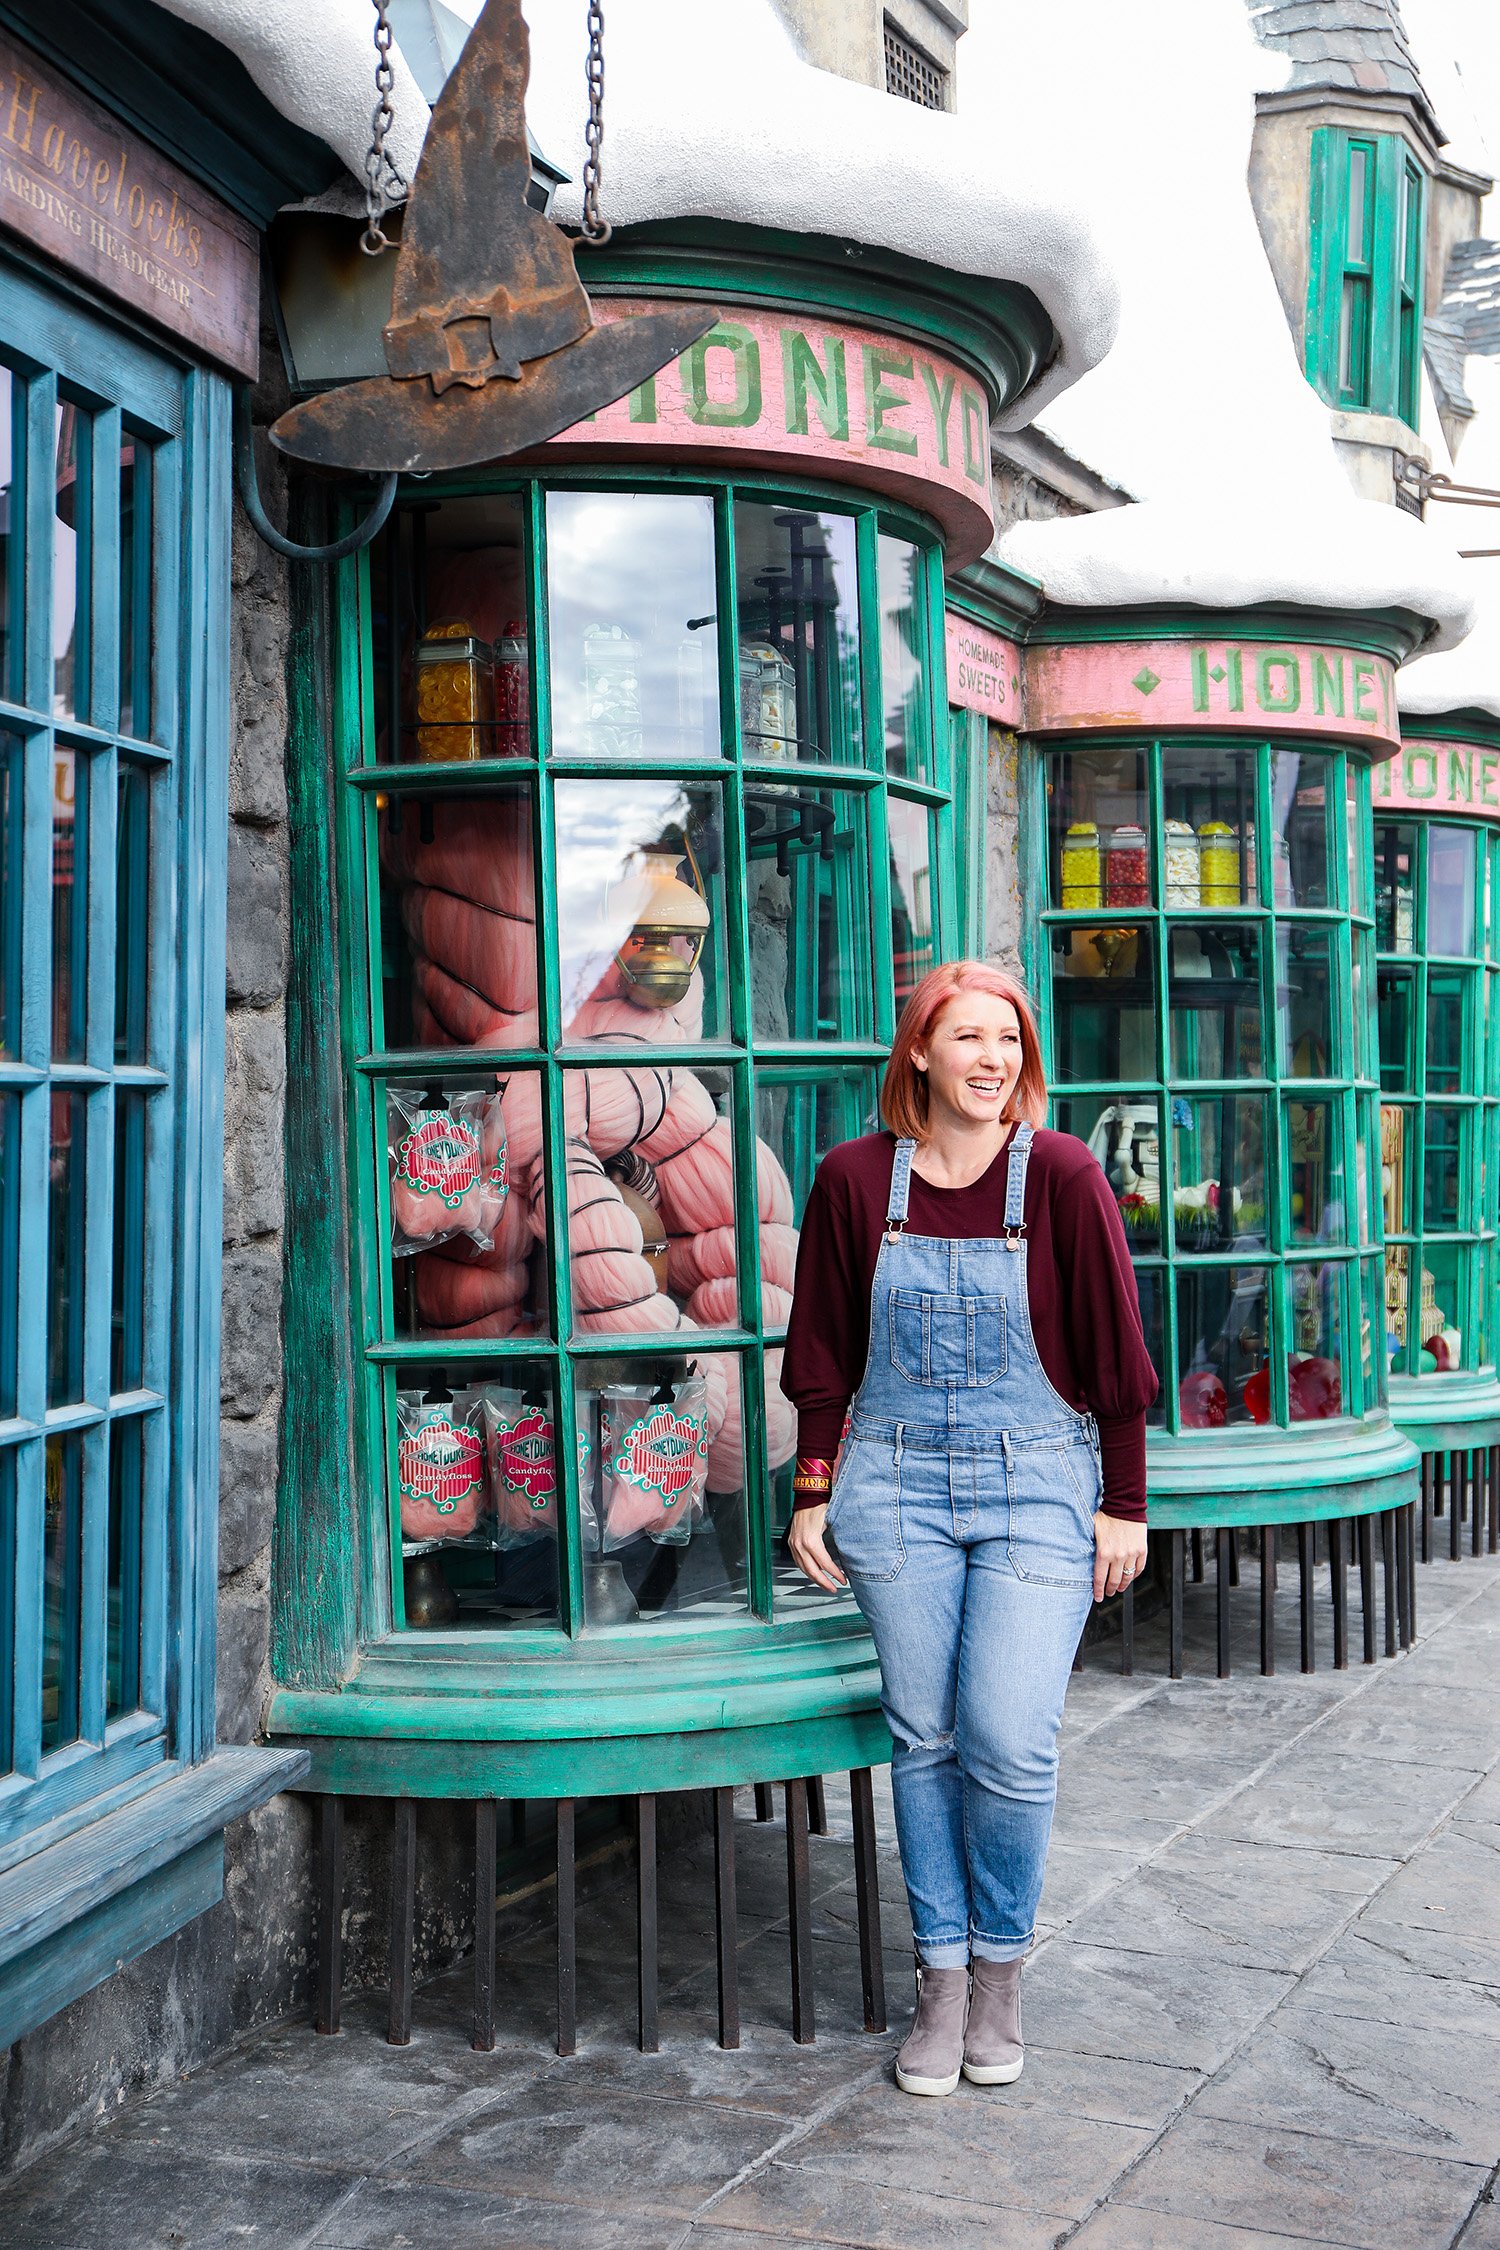 From Honeydukes to Hargrid's Hut, this is the ULTIMATE guide to taking pictures inside the Wizarding World of Harry Potter! Save it for your next trip to Harry Potter Land California!